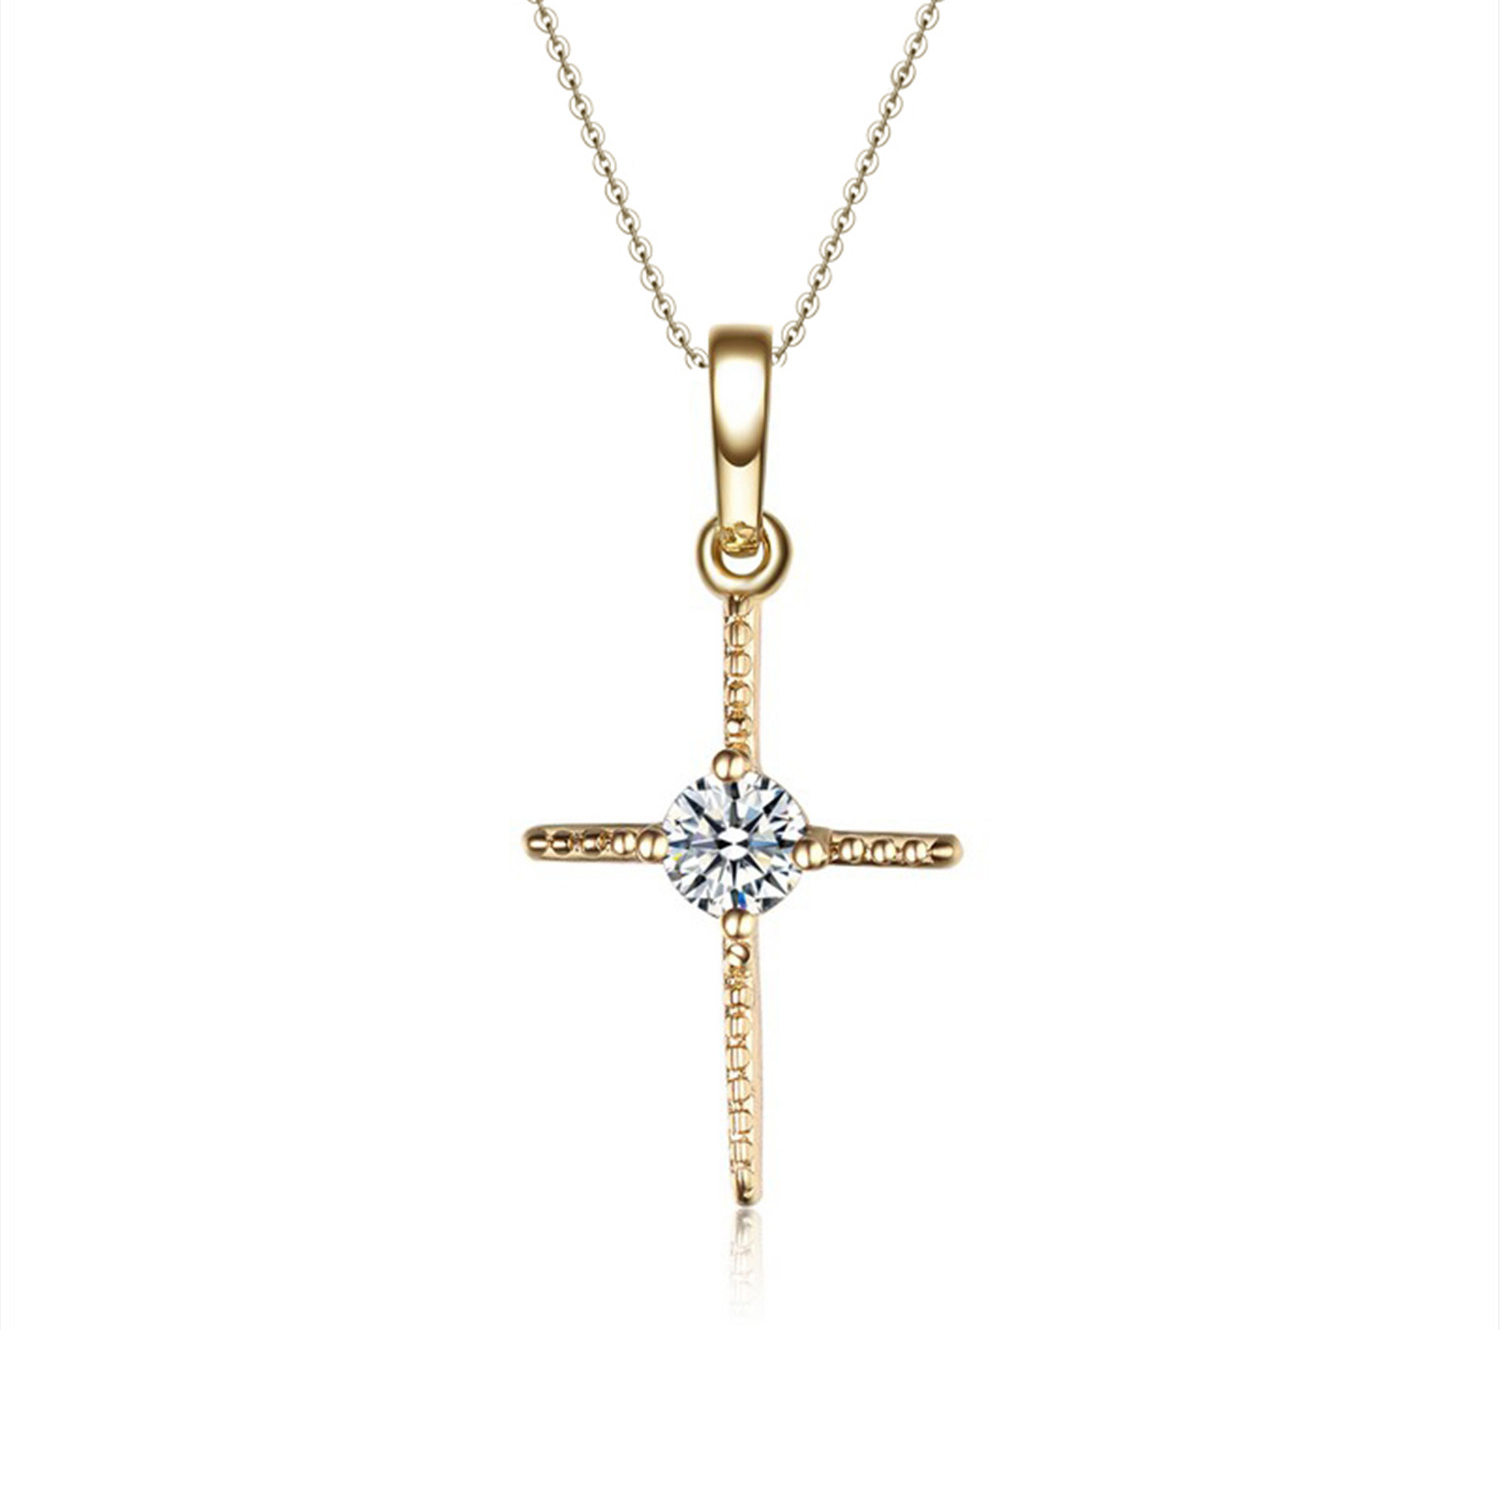 Luxurious 925 sterling silver gold plated pendant necklace women jewelry hot sale cross necklace (图3)